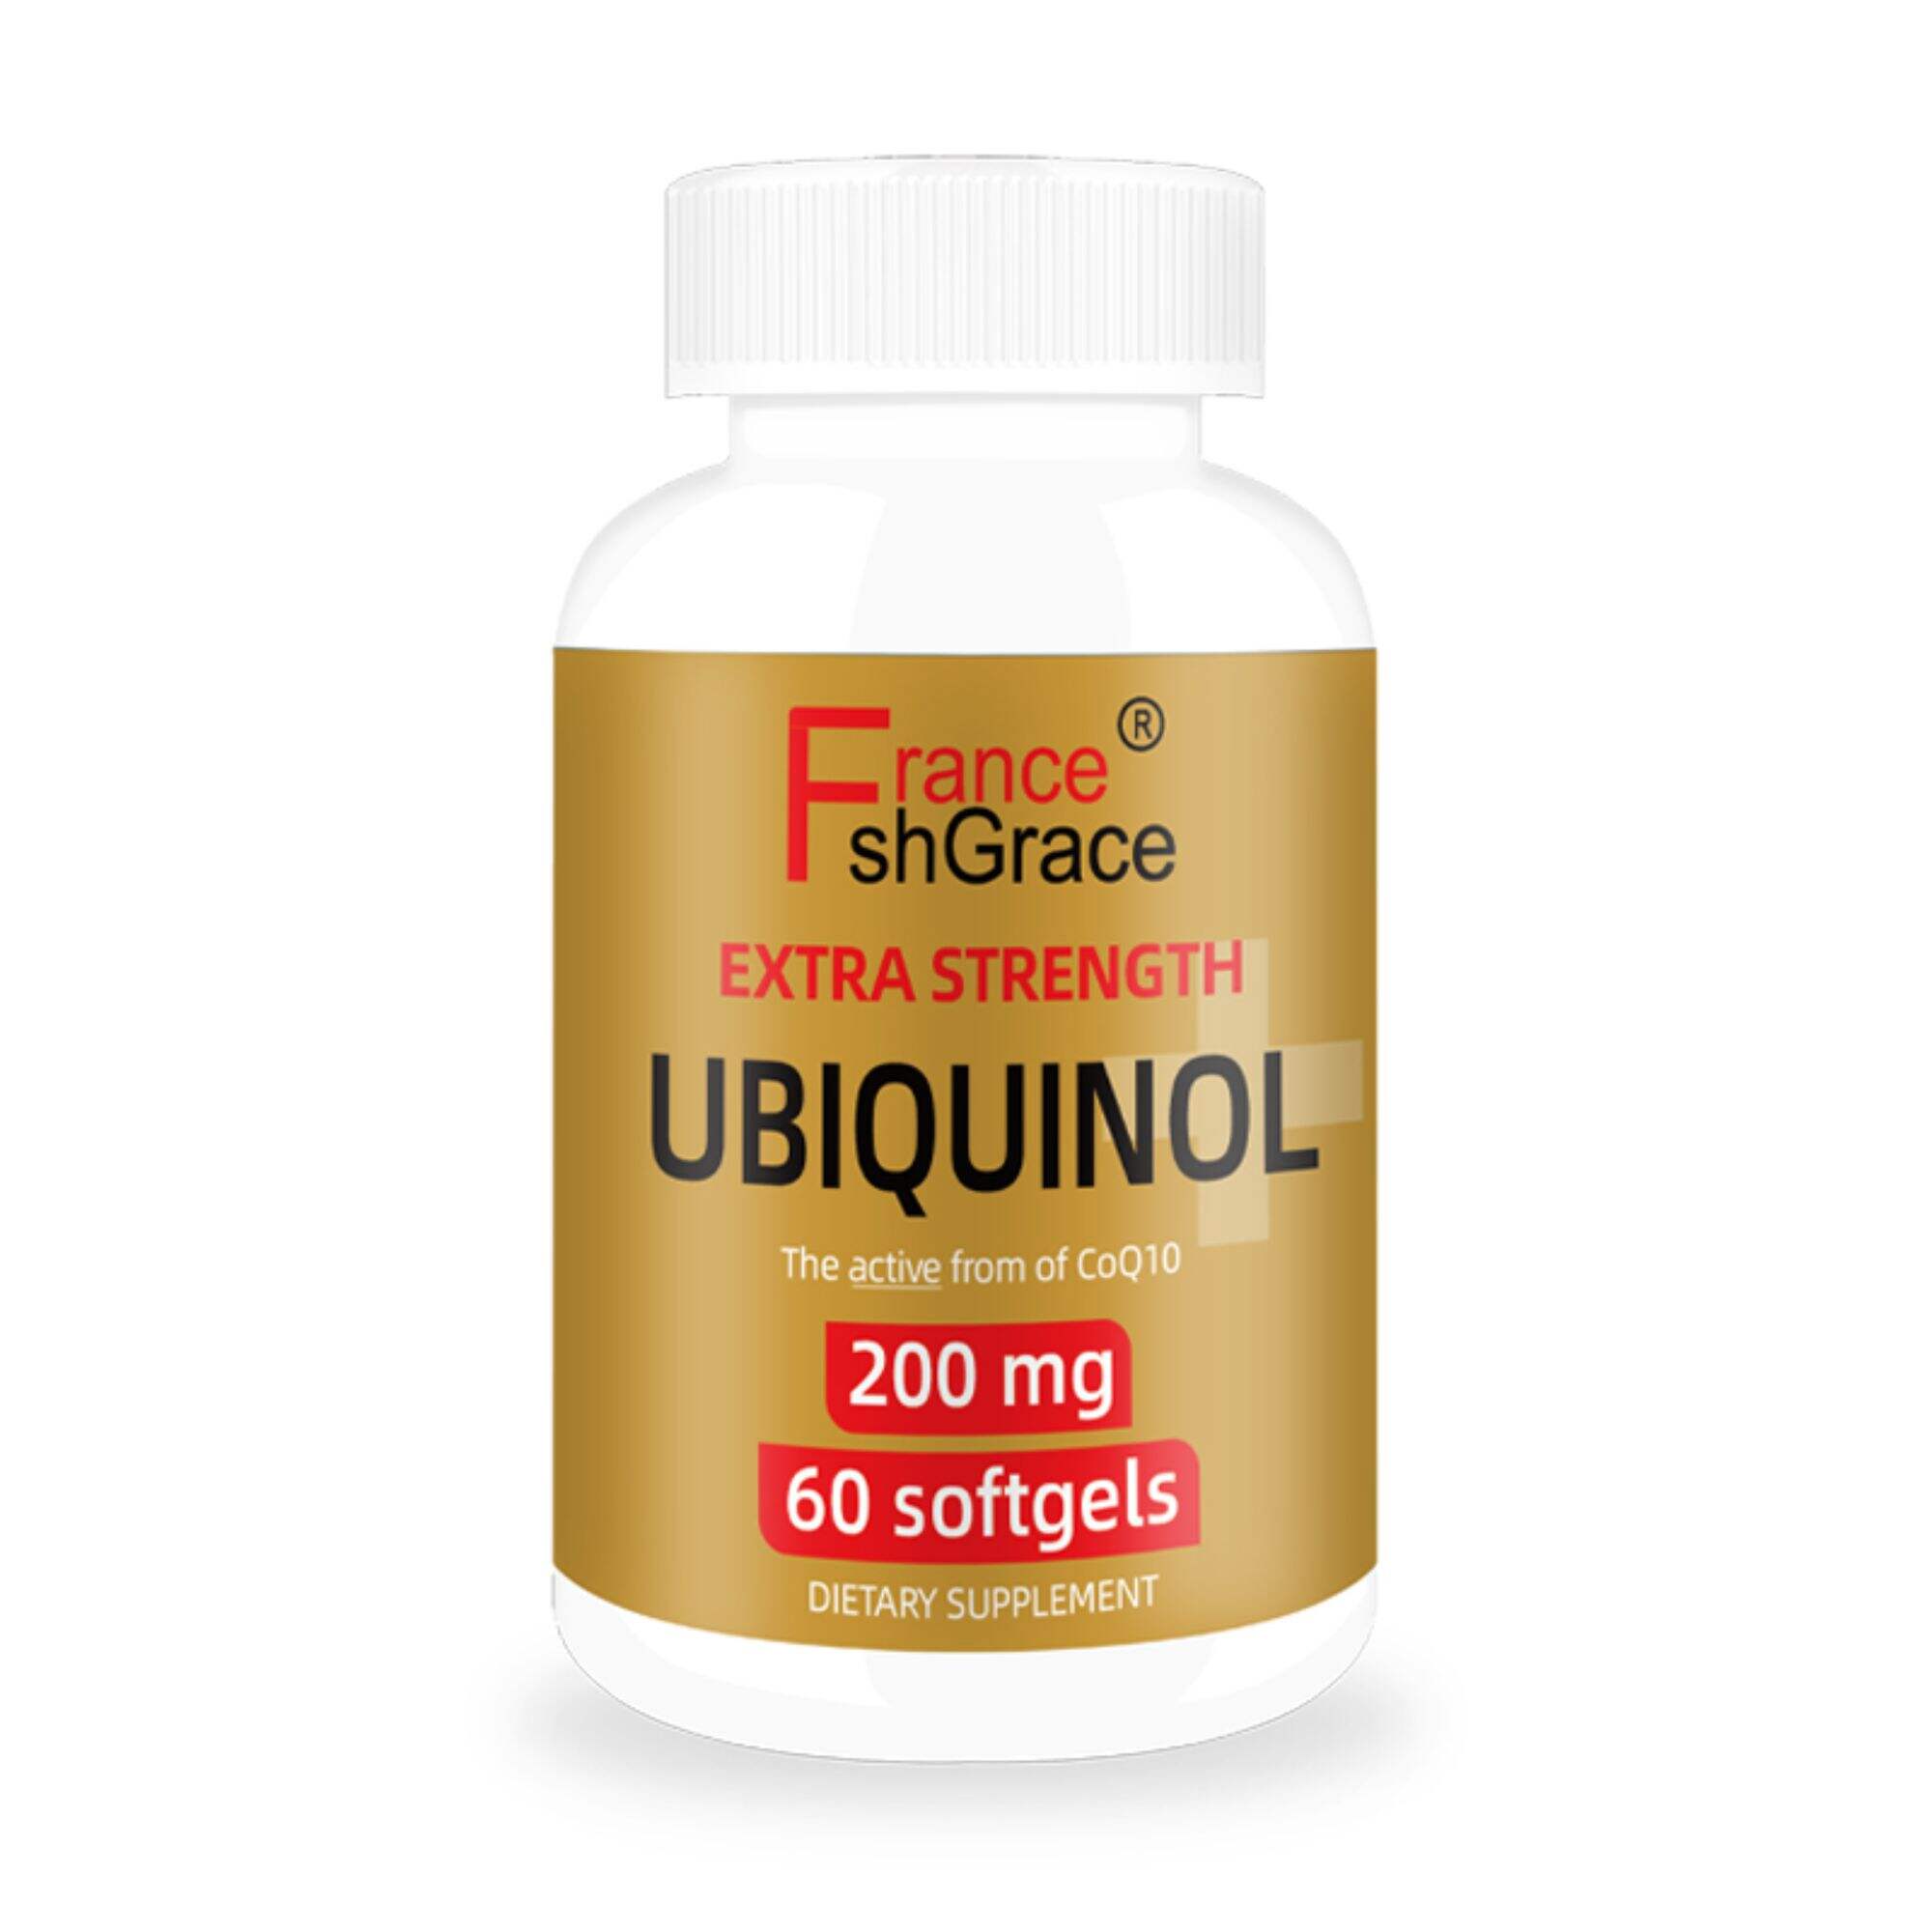 Qunol 200mg Ubiquinol, Powerful Antioxidant for Heart and Vascular Health, Essential for energy production, Natural Supplement 